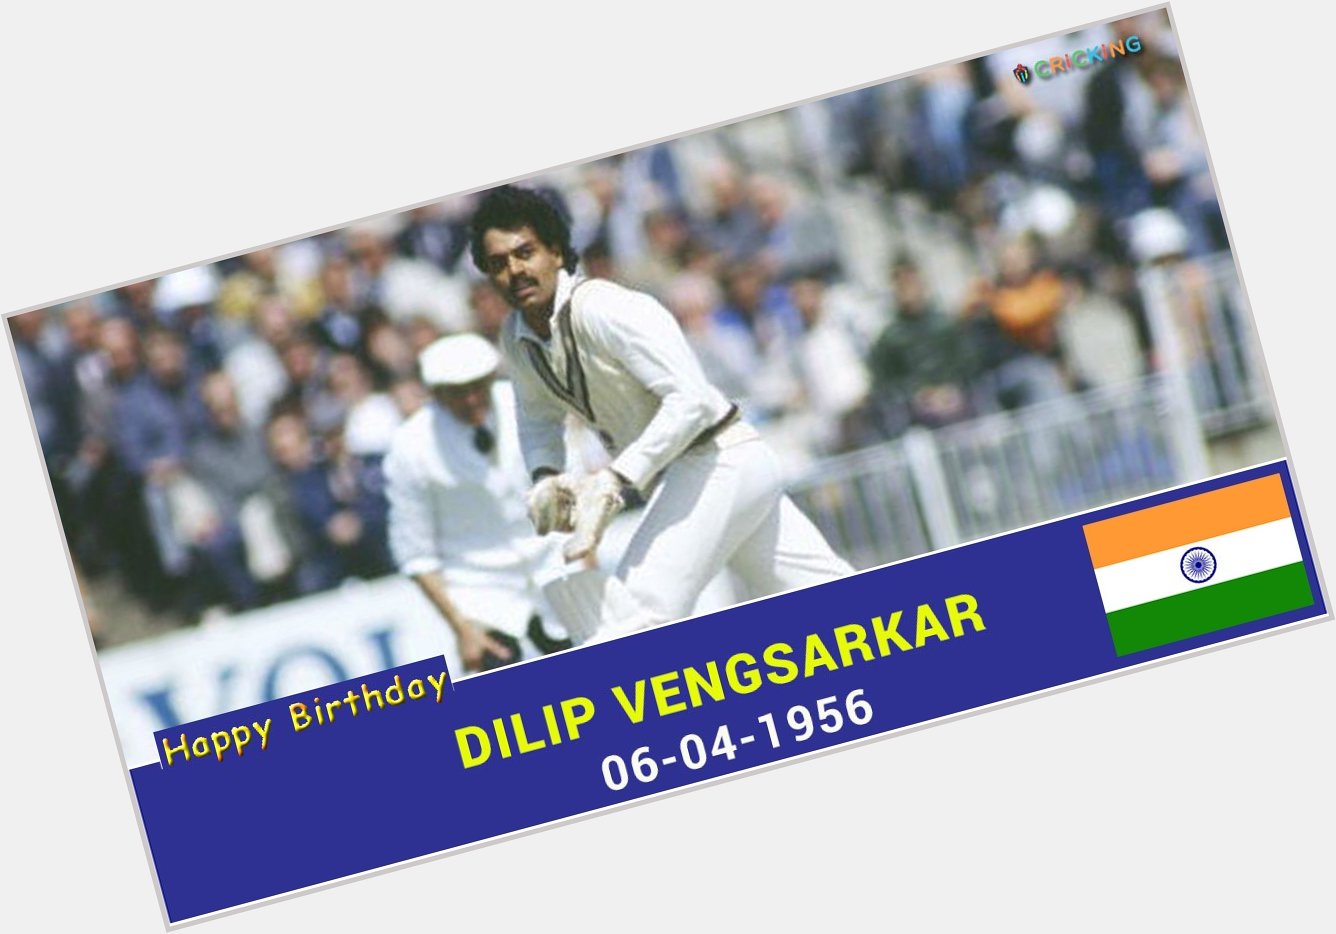 Happy Birthday Dilip Vengsarkar. The former Indian cricketer turns 61 today. 